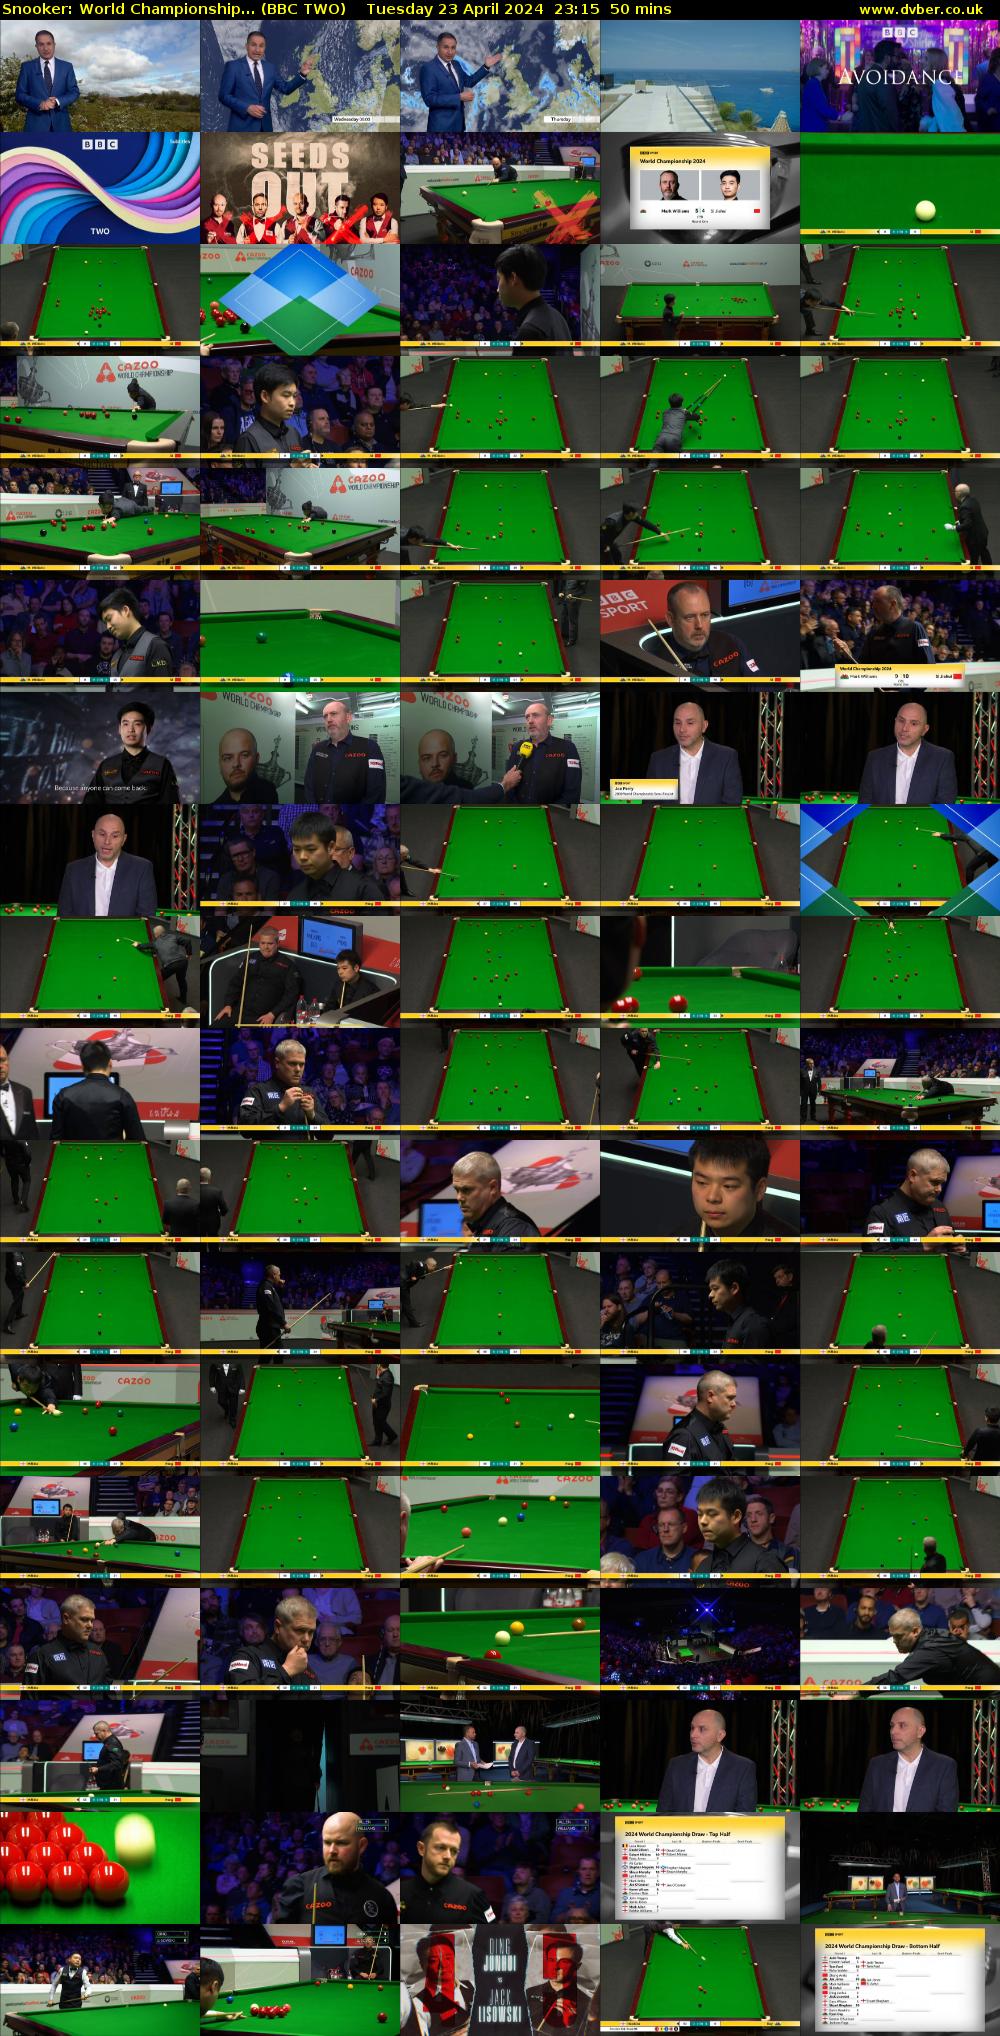 Snooker: World Championship... (BBC TWO) Tuesday 23 April 2024 23:15 - 00:05